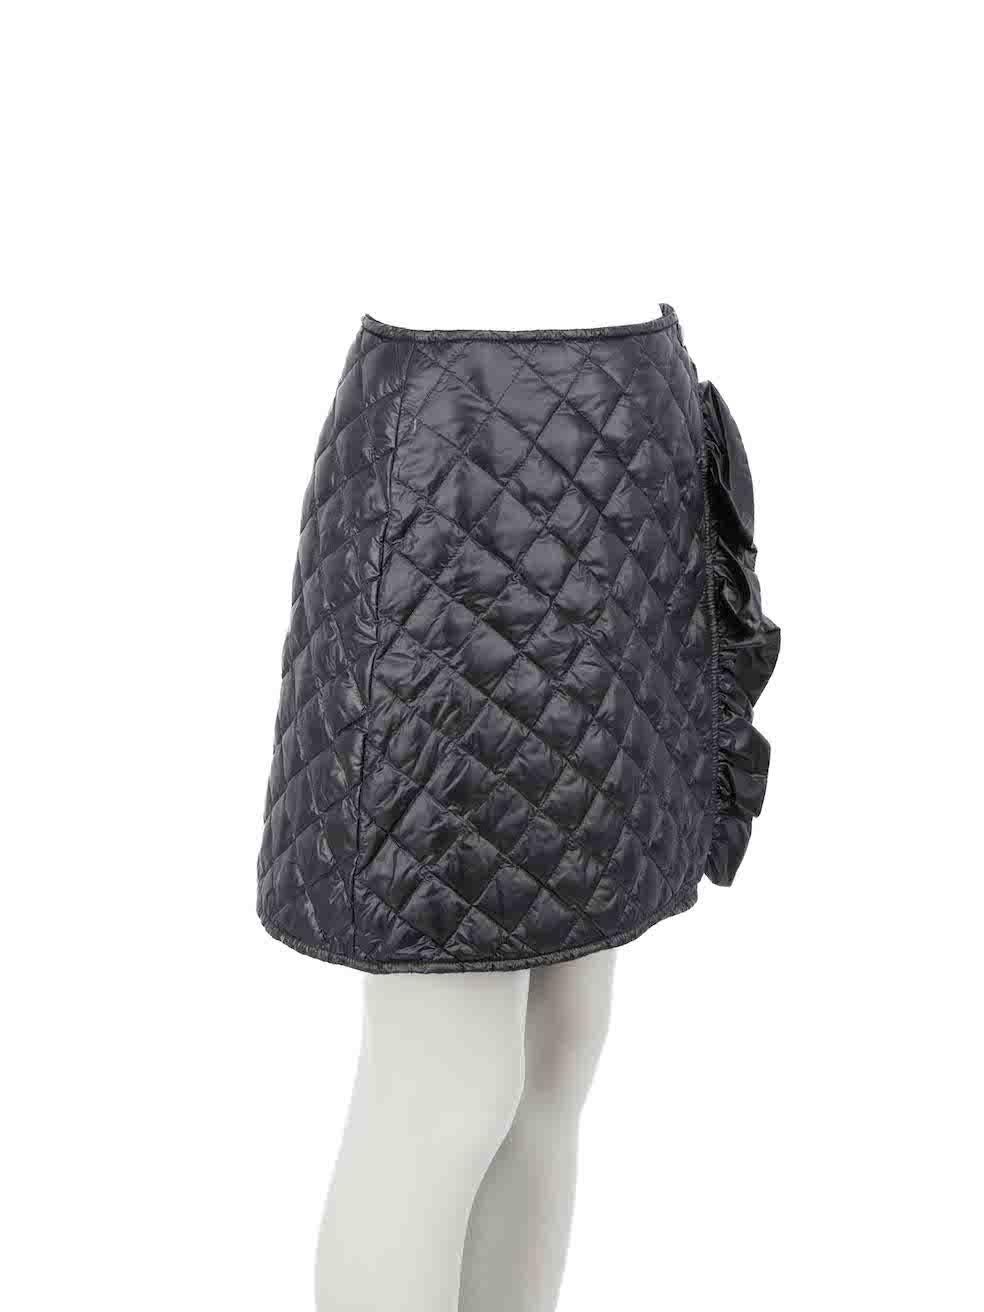 CONDITION is Never worn. No visible wear to skirt is evident on this new Moncler designer resale item.
 
Details
Gonna
Black
Synthetic
Mini skirt
Quilted
Wrap front with snap button and button closure
Ruffles accent
 
Made in Hungary
